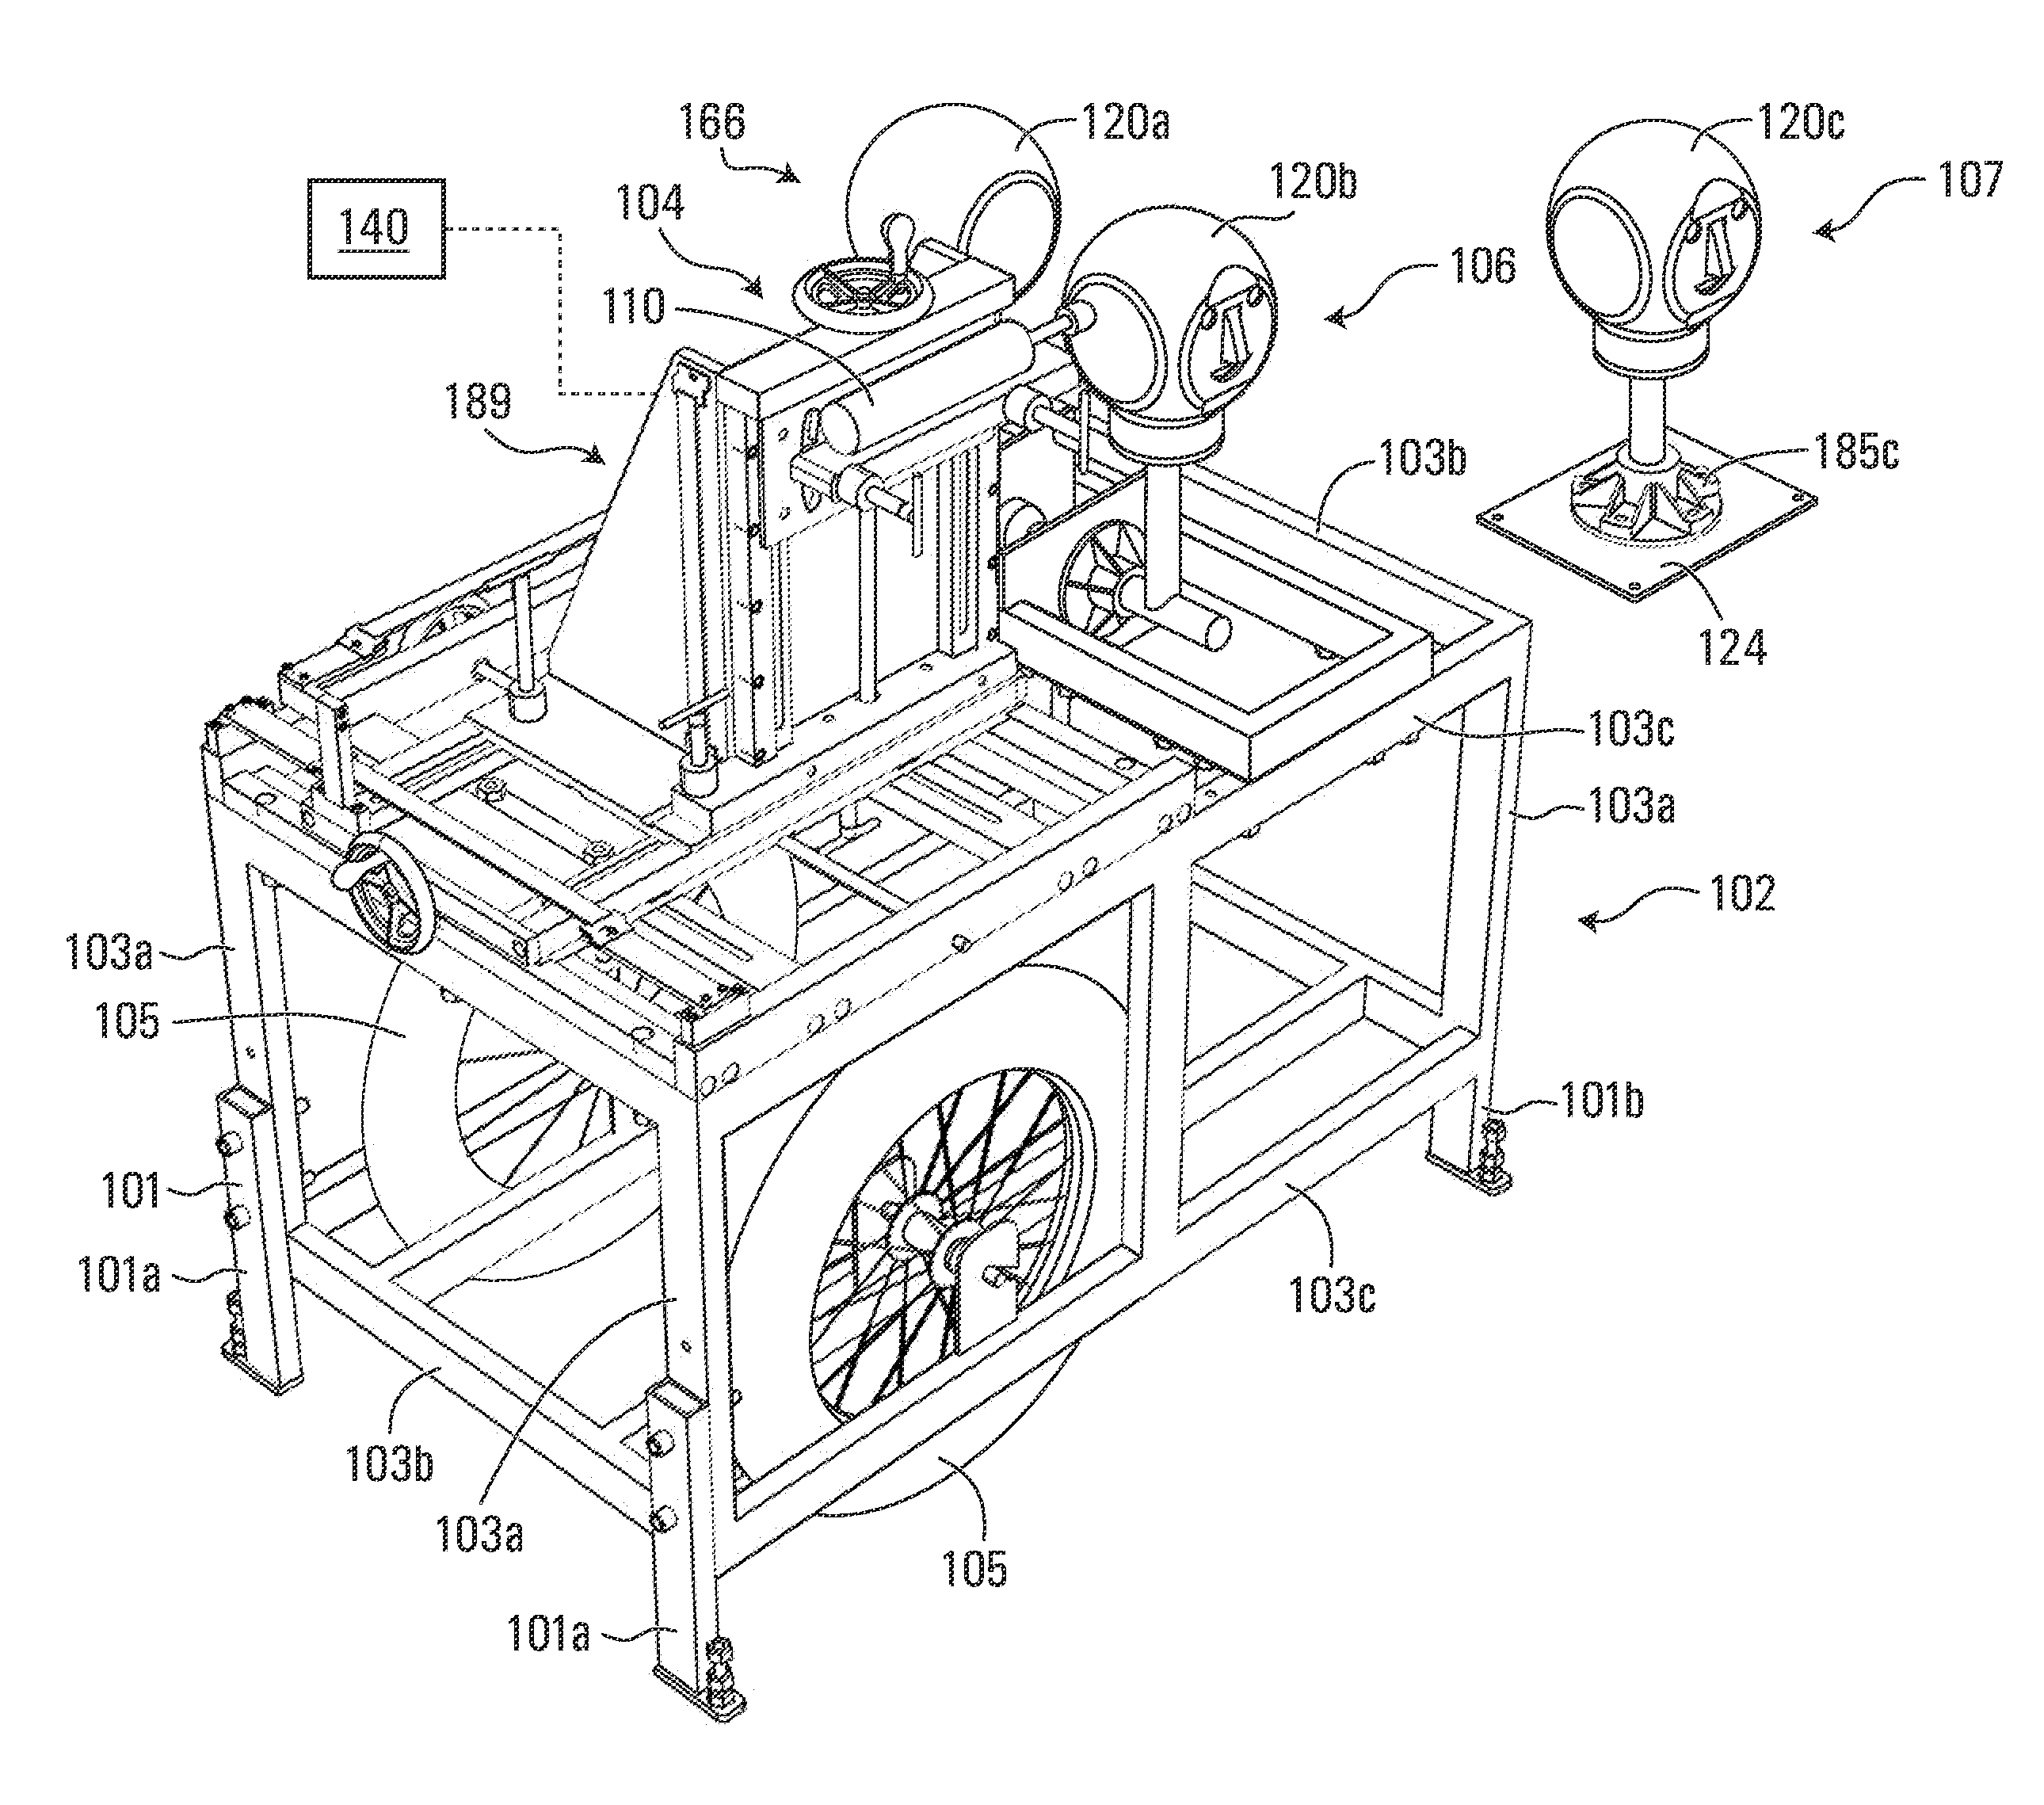 Method and apparatus for simulating head impacts for helmet testing